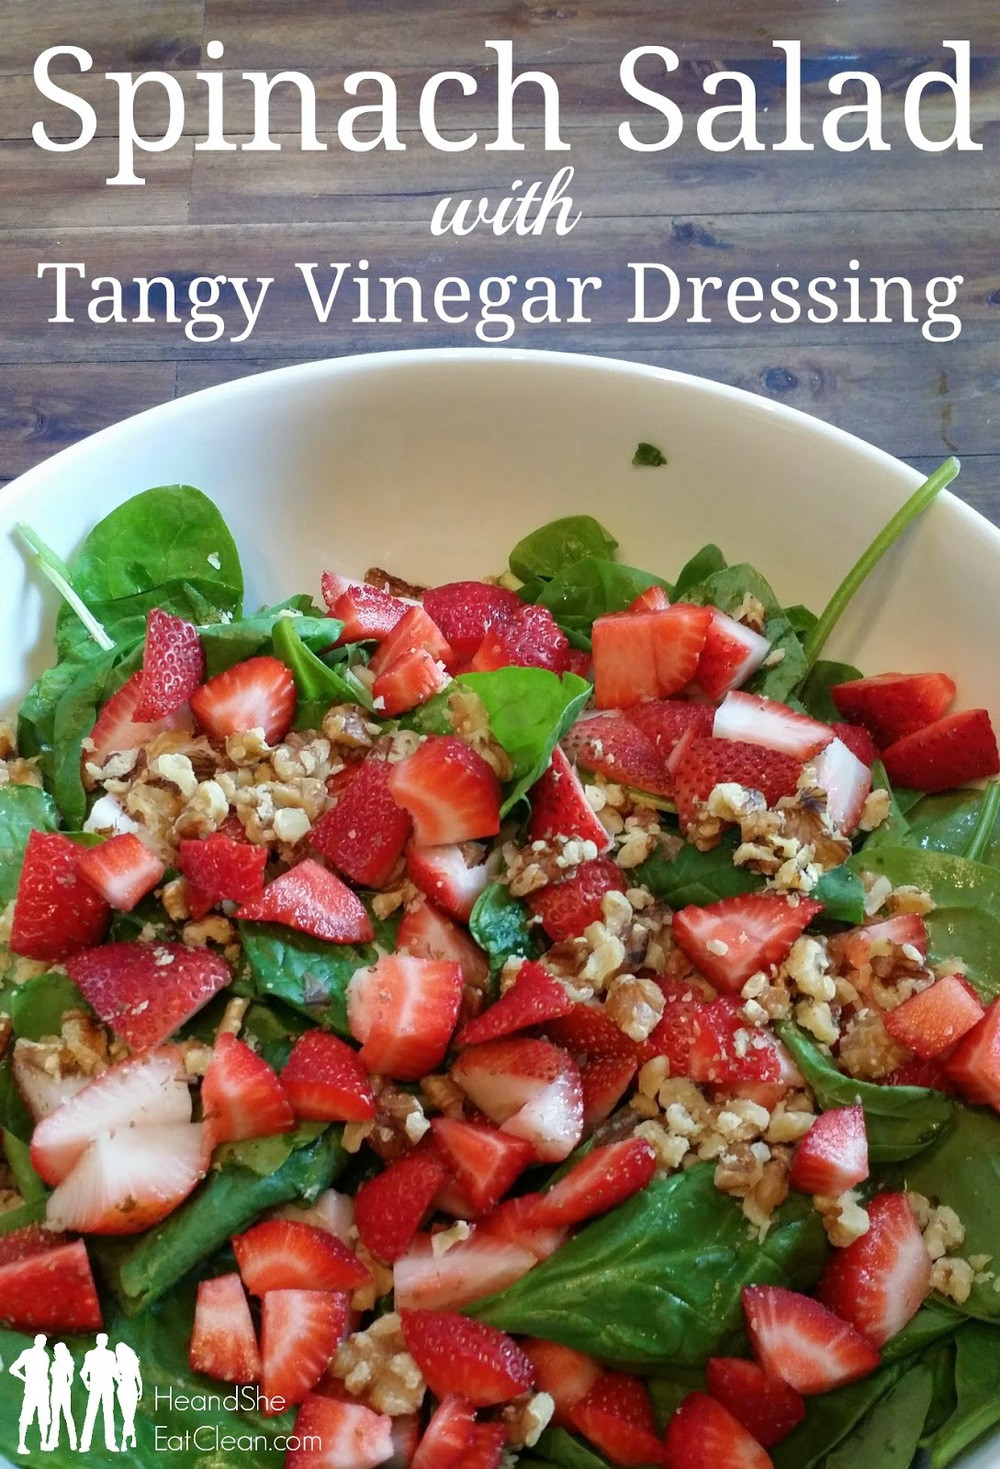 Salad Dressings For Spinach Salad
 Spinach Salad with Tangy Vinegar Dressing — He & She Eat